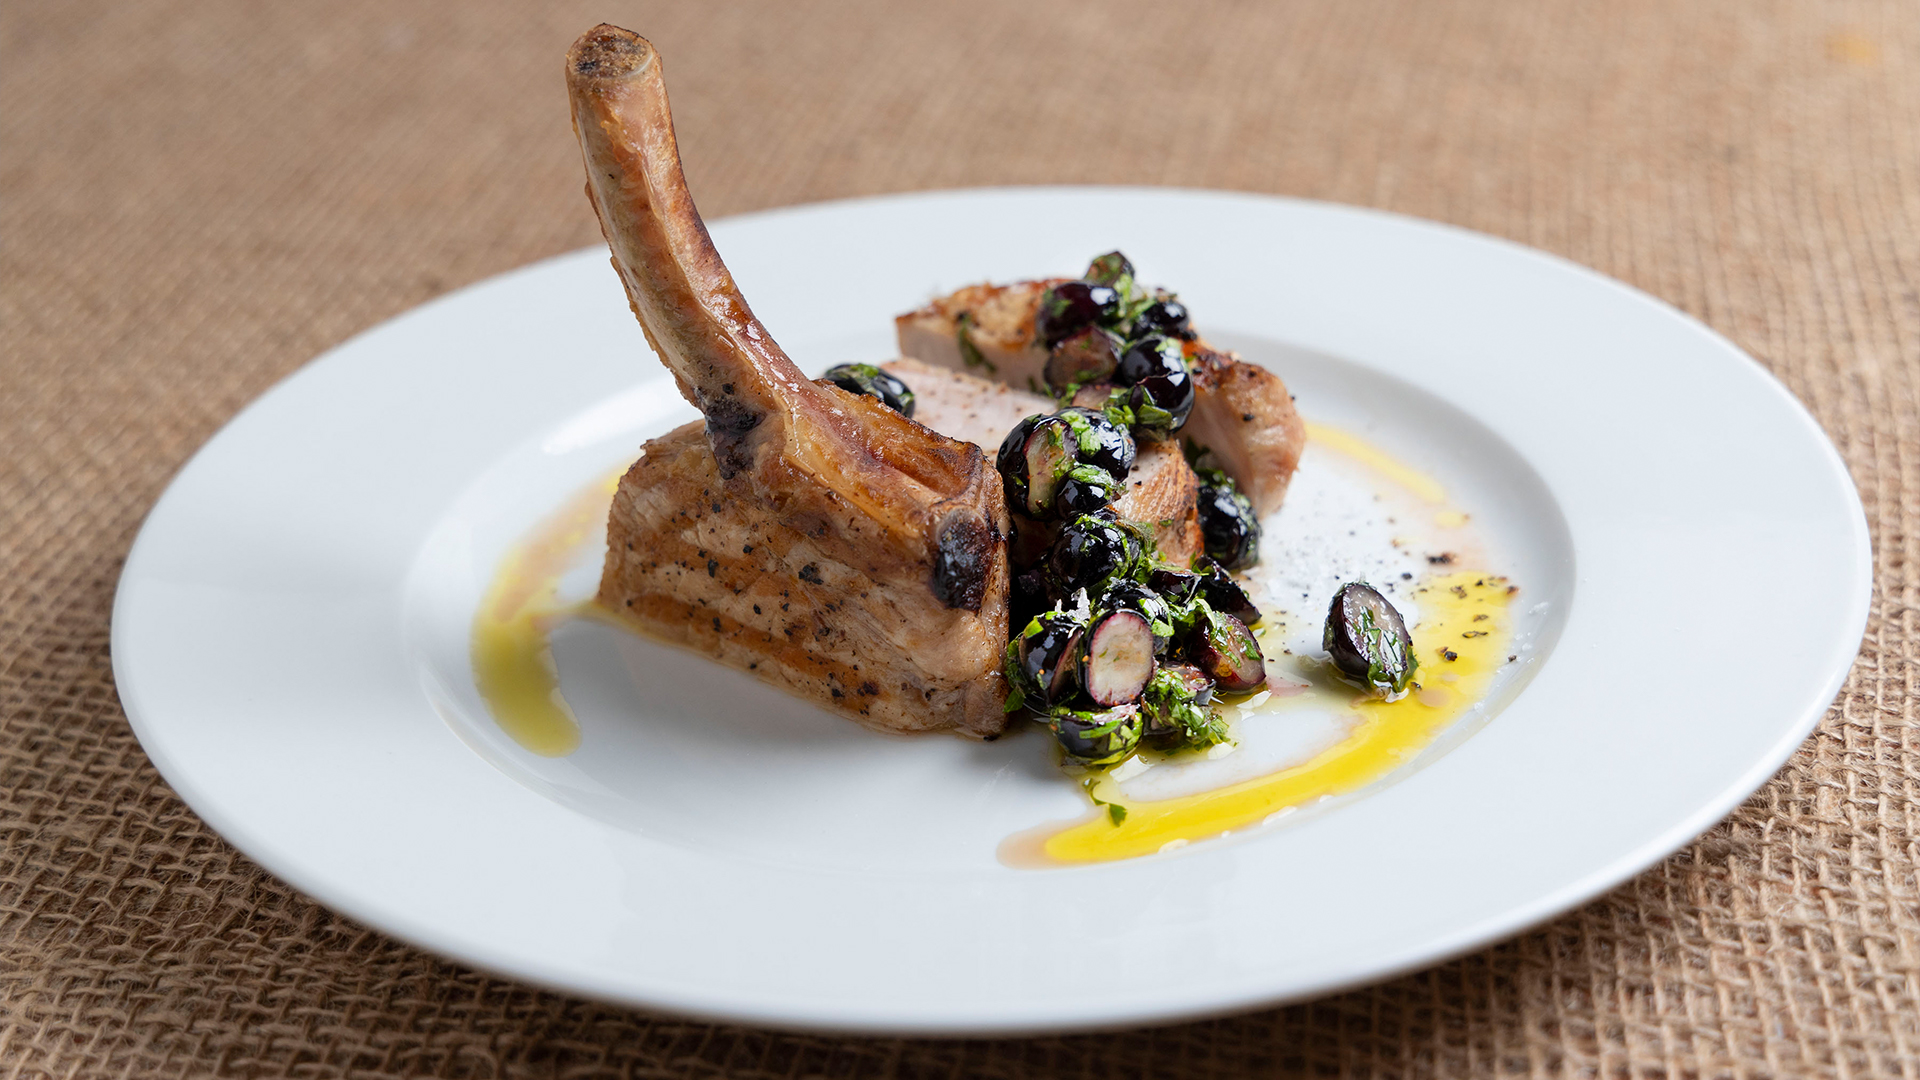 Pork chop with blueberry chimichurri